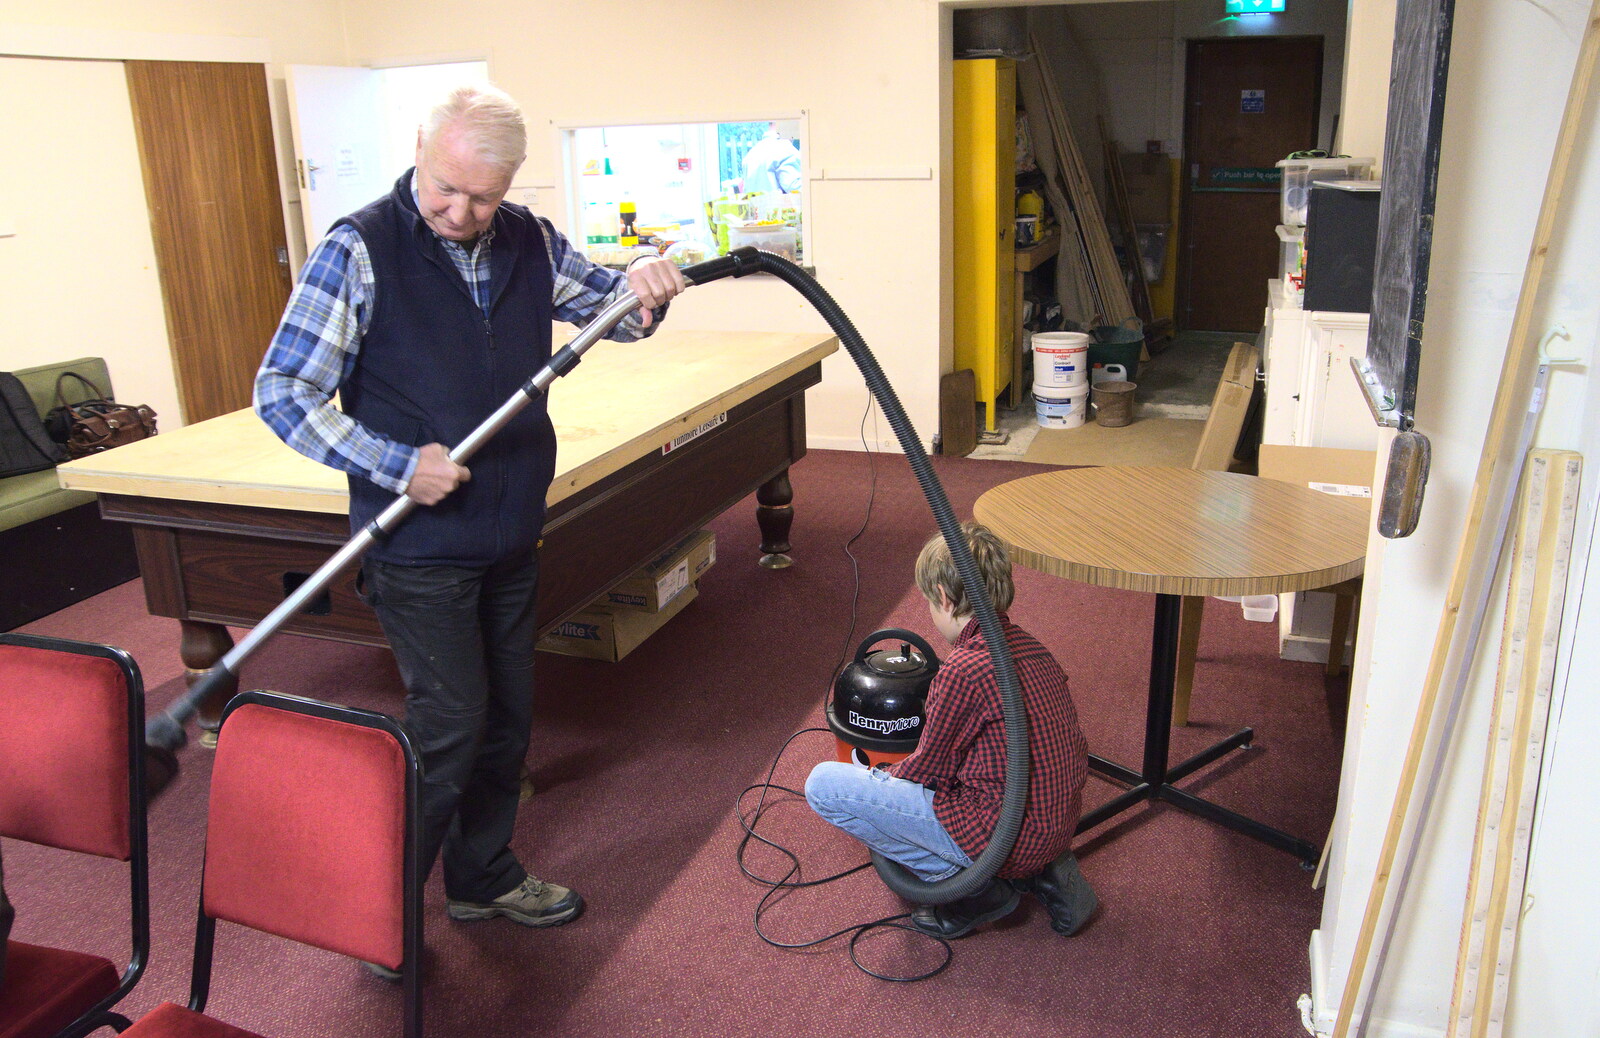 Grandad's Memorial Do, The Village Hall, Brome, Suffolk - 28th October 2022: John helps out with the hoovering